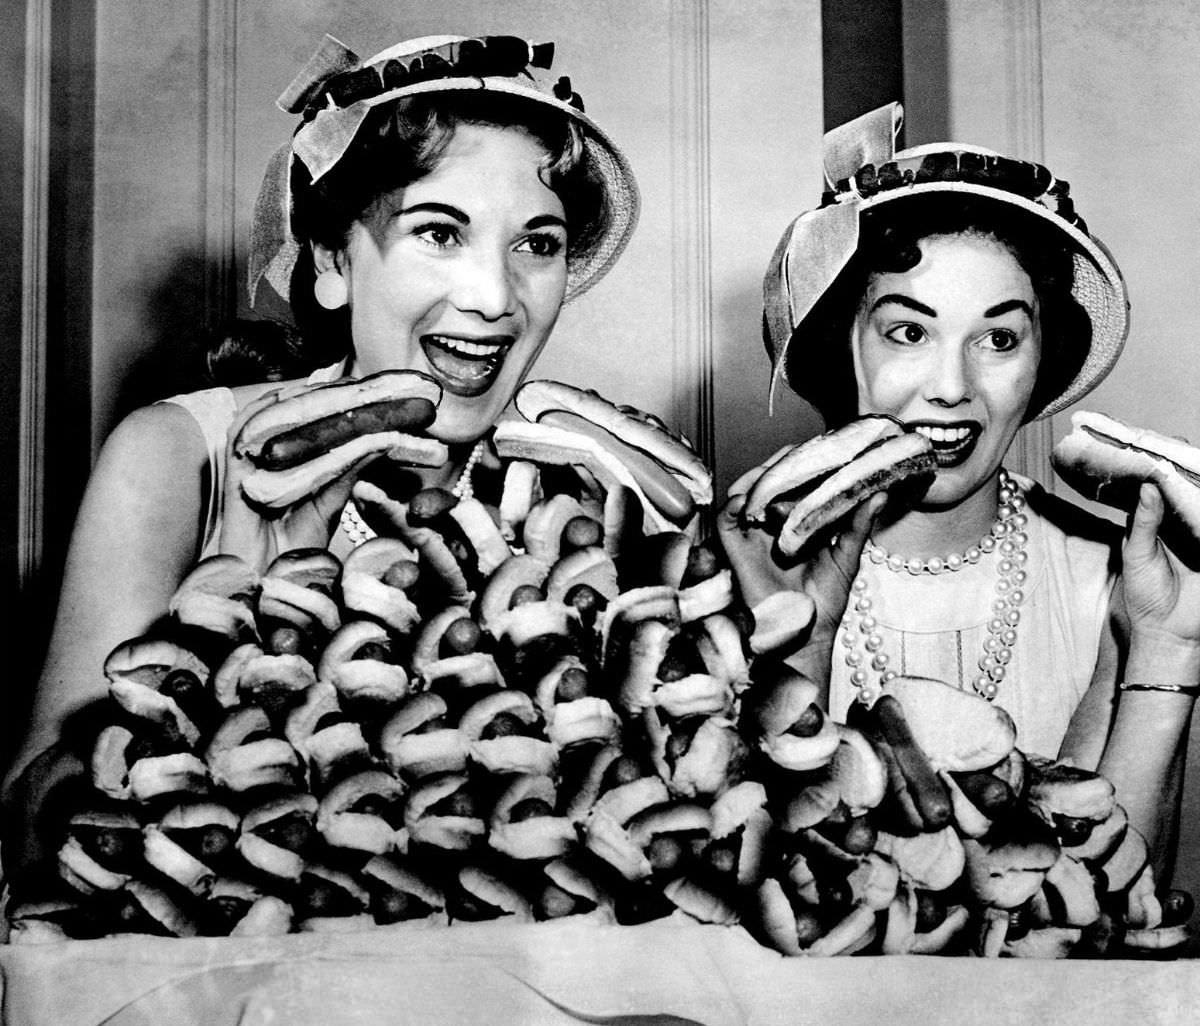 Marion Todd, left, and Marge Kraus during National Hot Dog Month, posing with a plate of 60 hot dogs, which at the time represented what the average American ate in a year in Chicago, 1957.